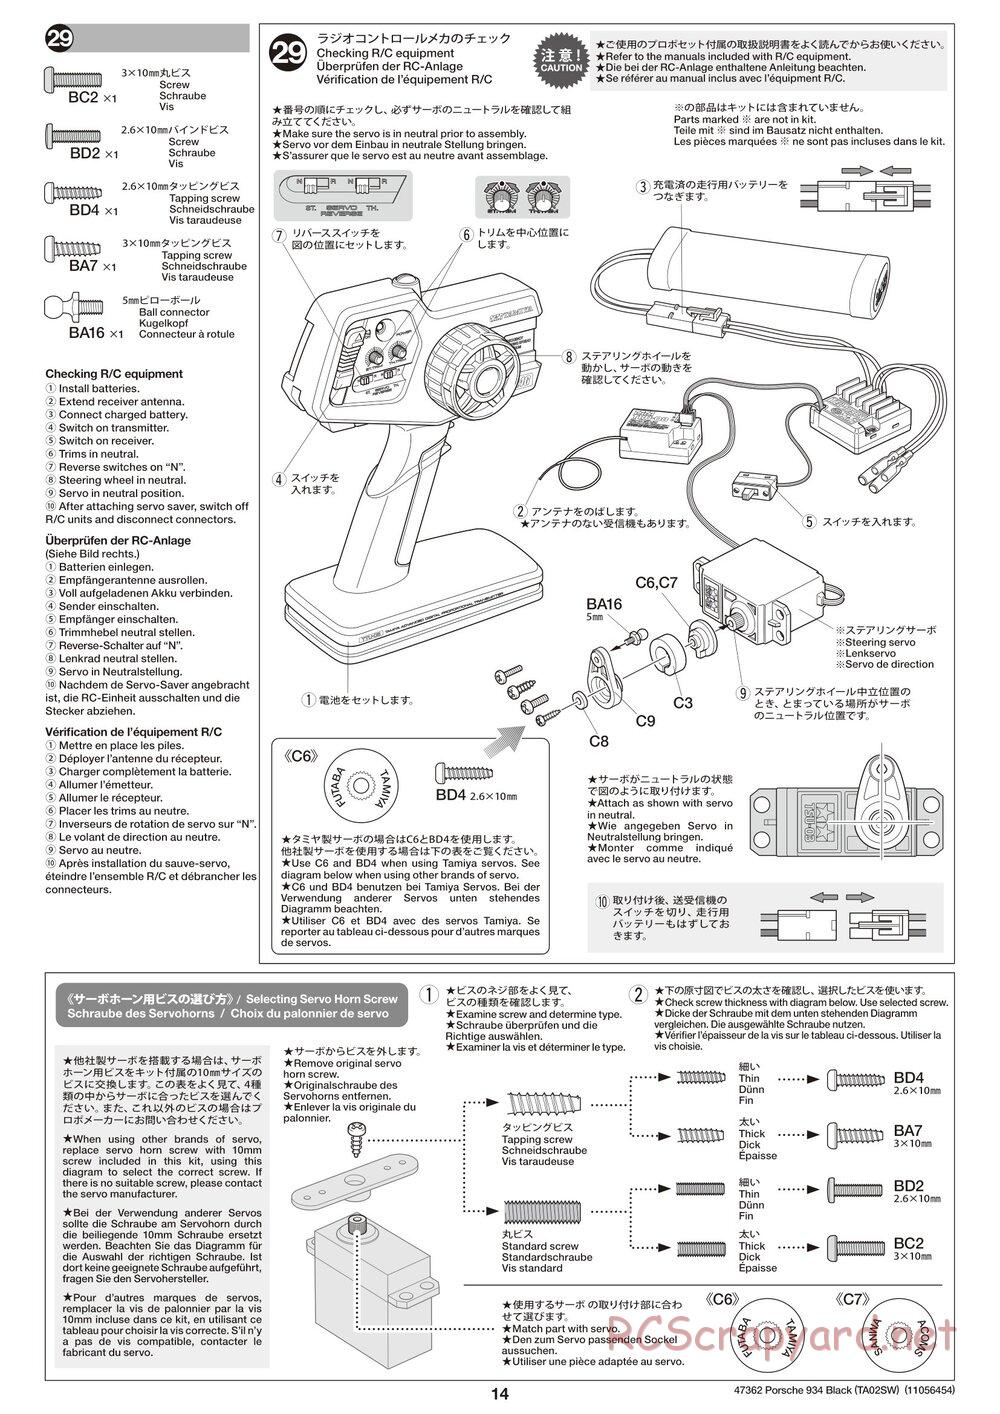 Tamiya - TT-02 White Special Chassis - Manual - Page 14